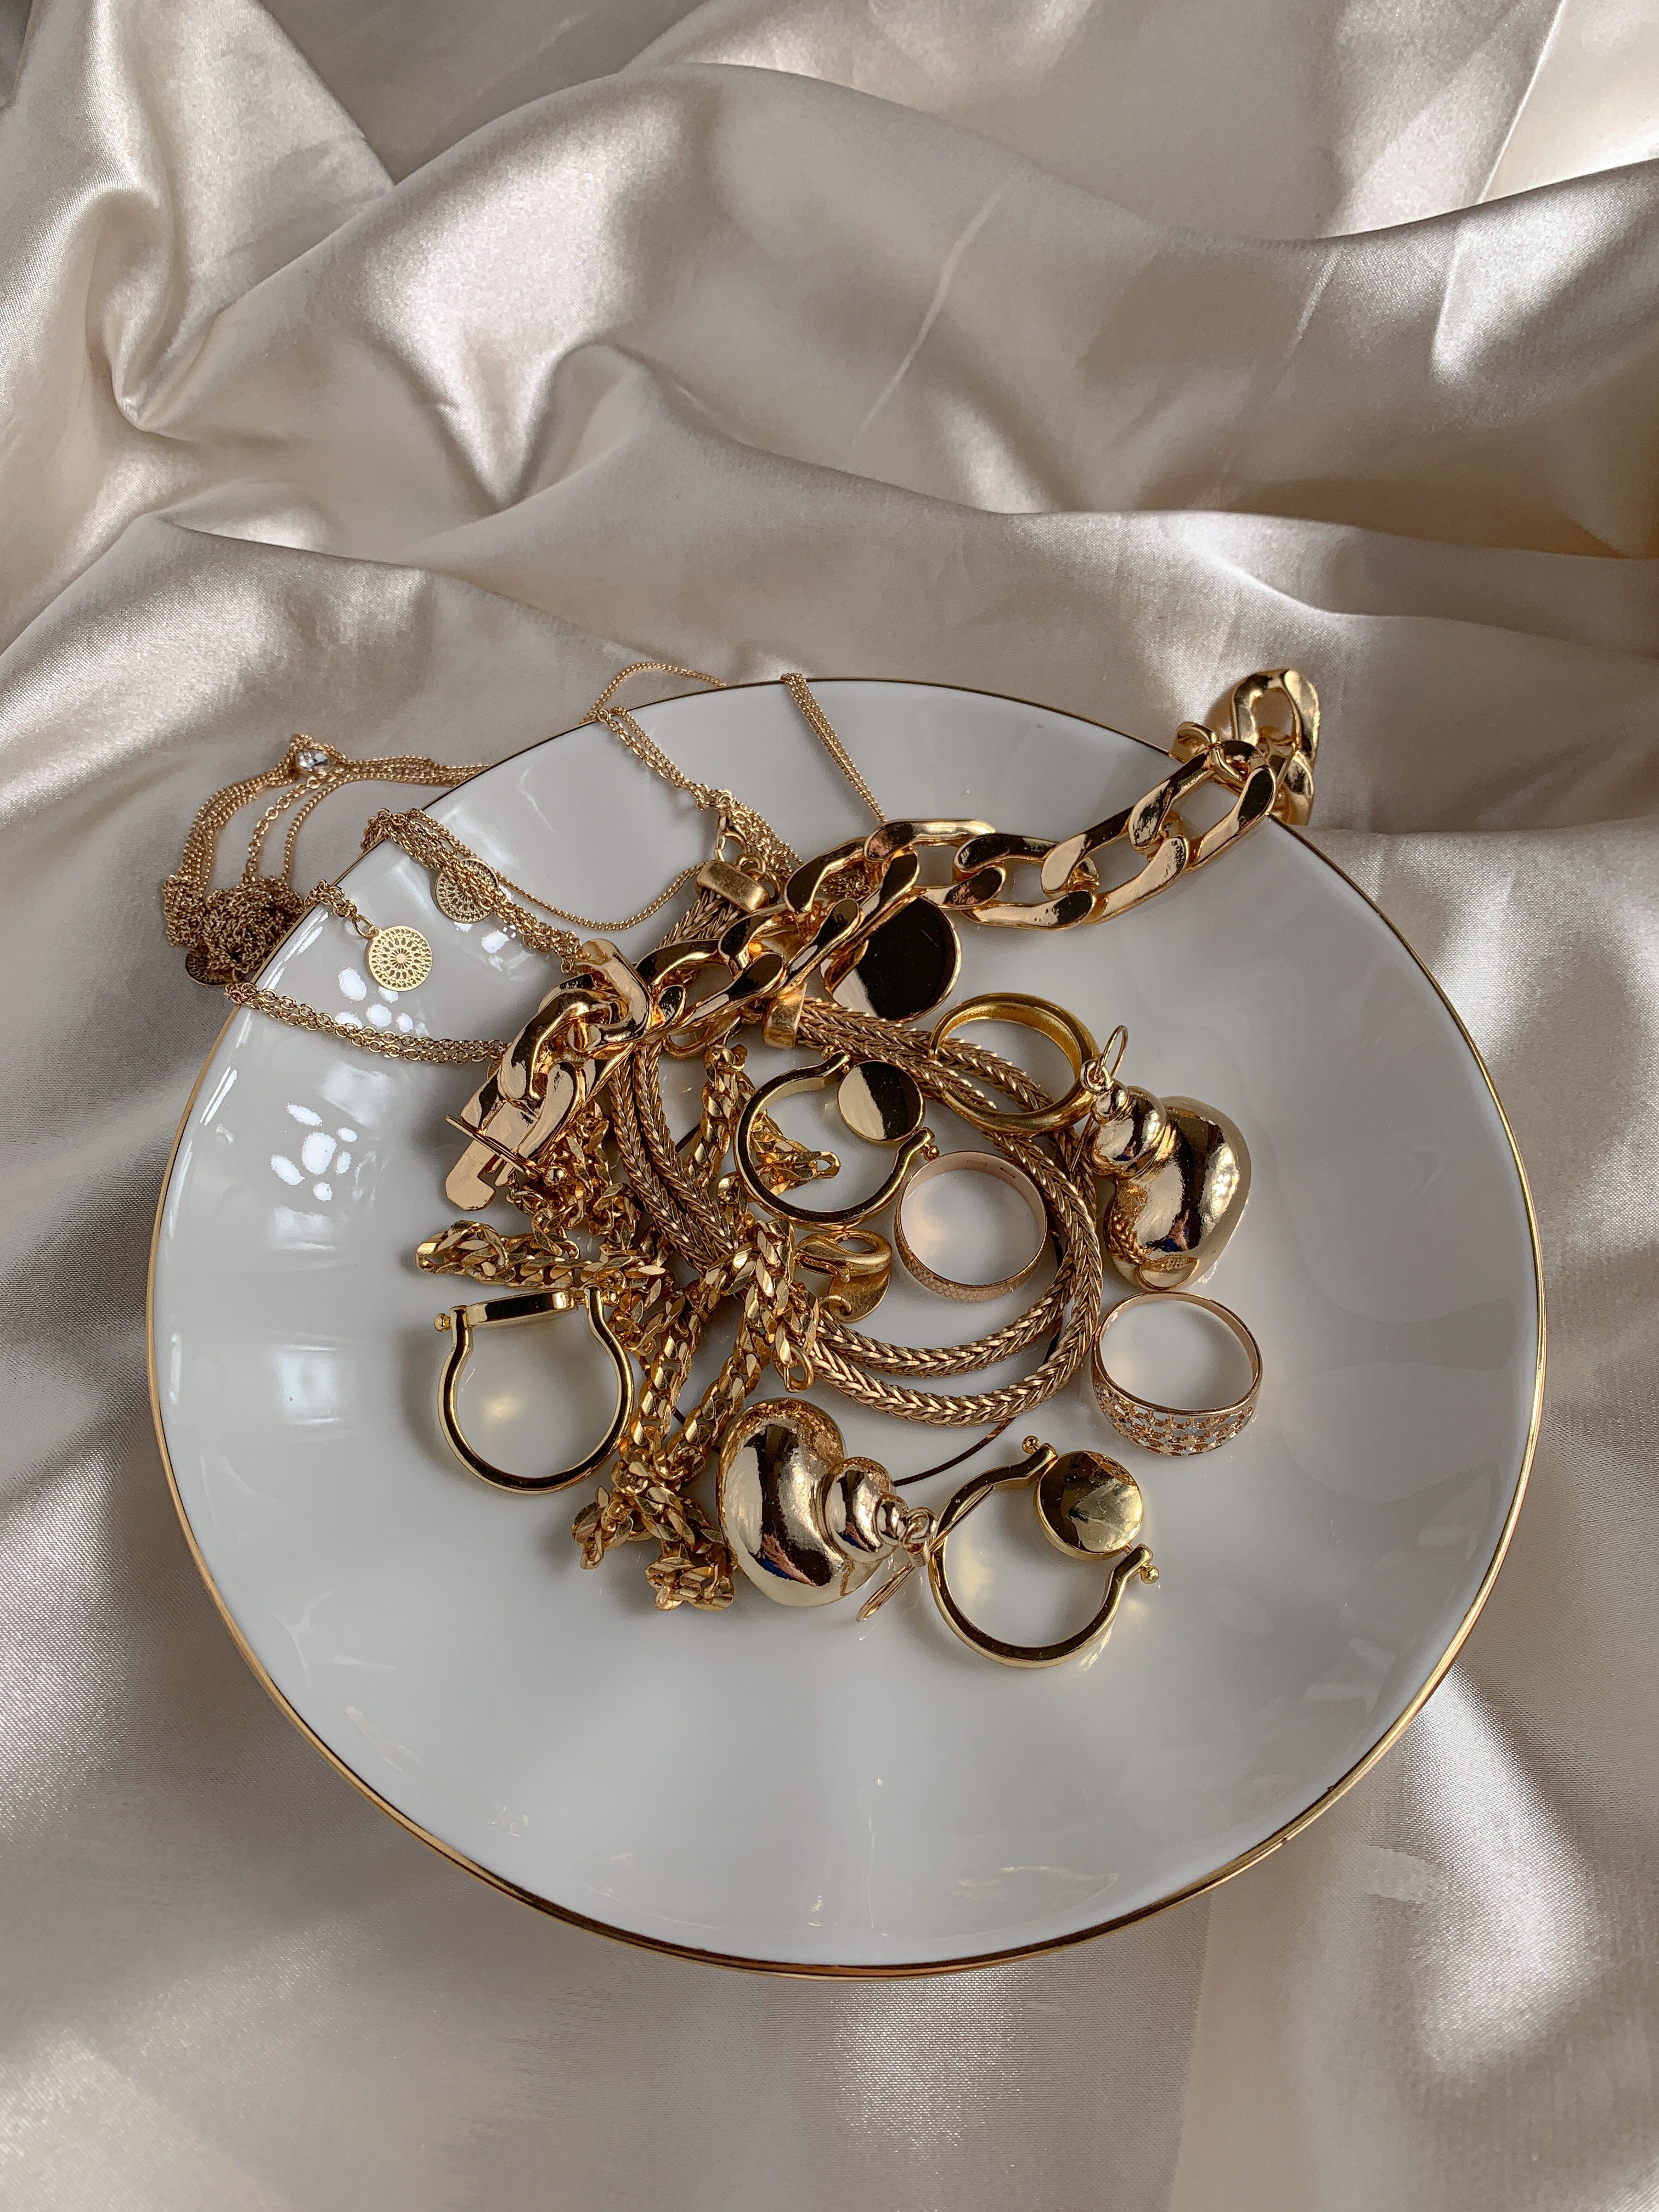 Golden jewelry in a white dish